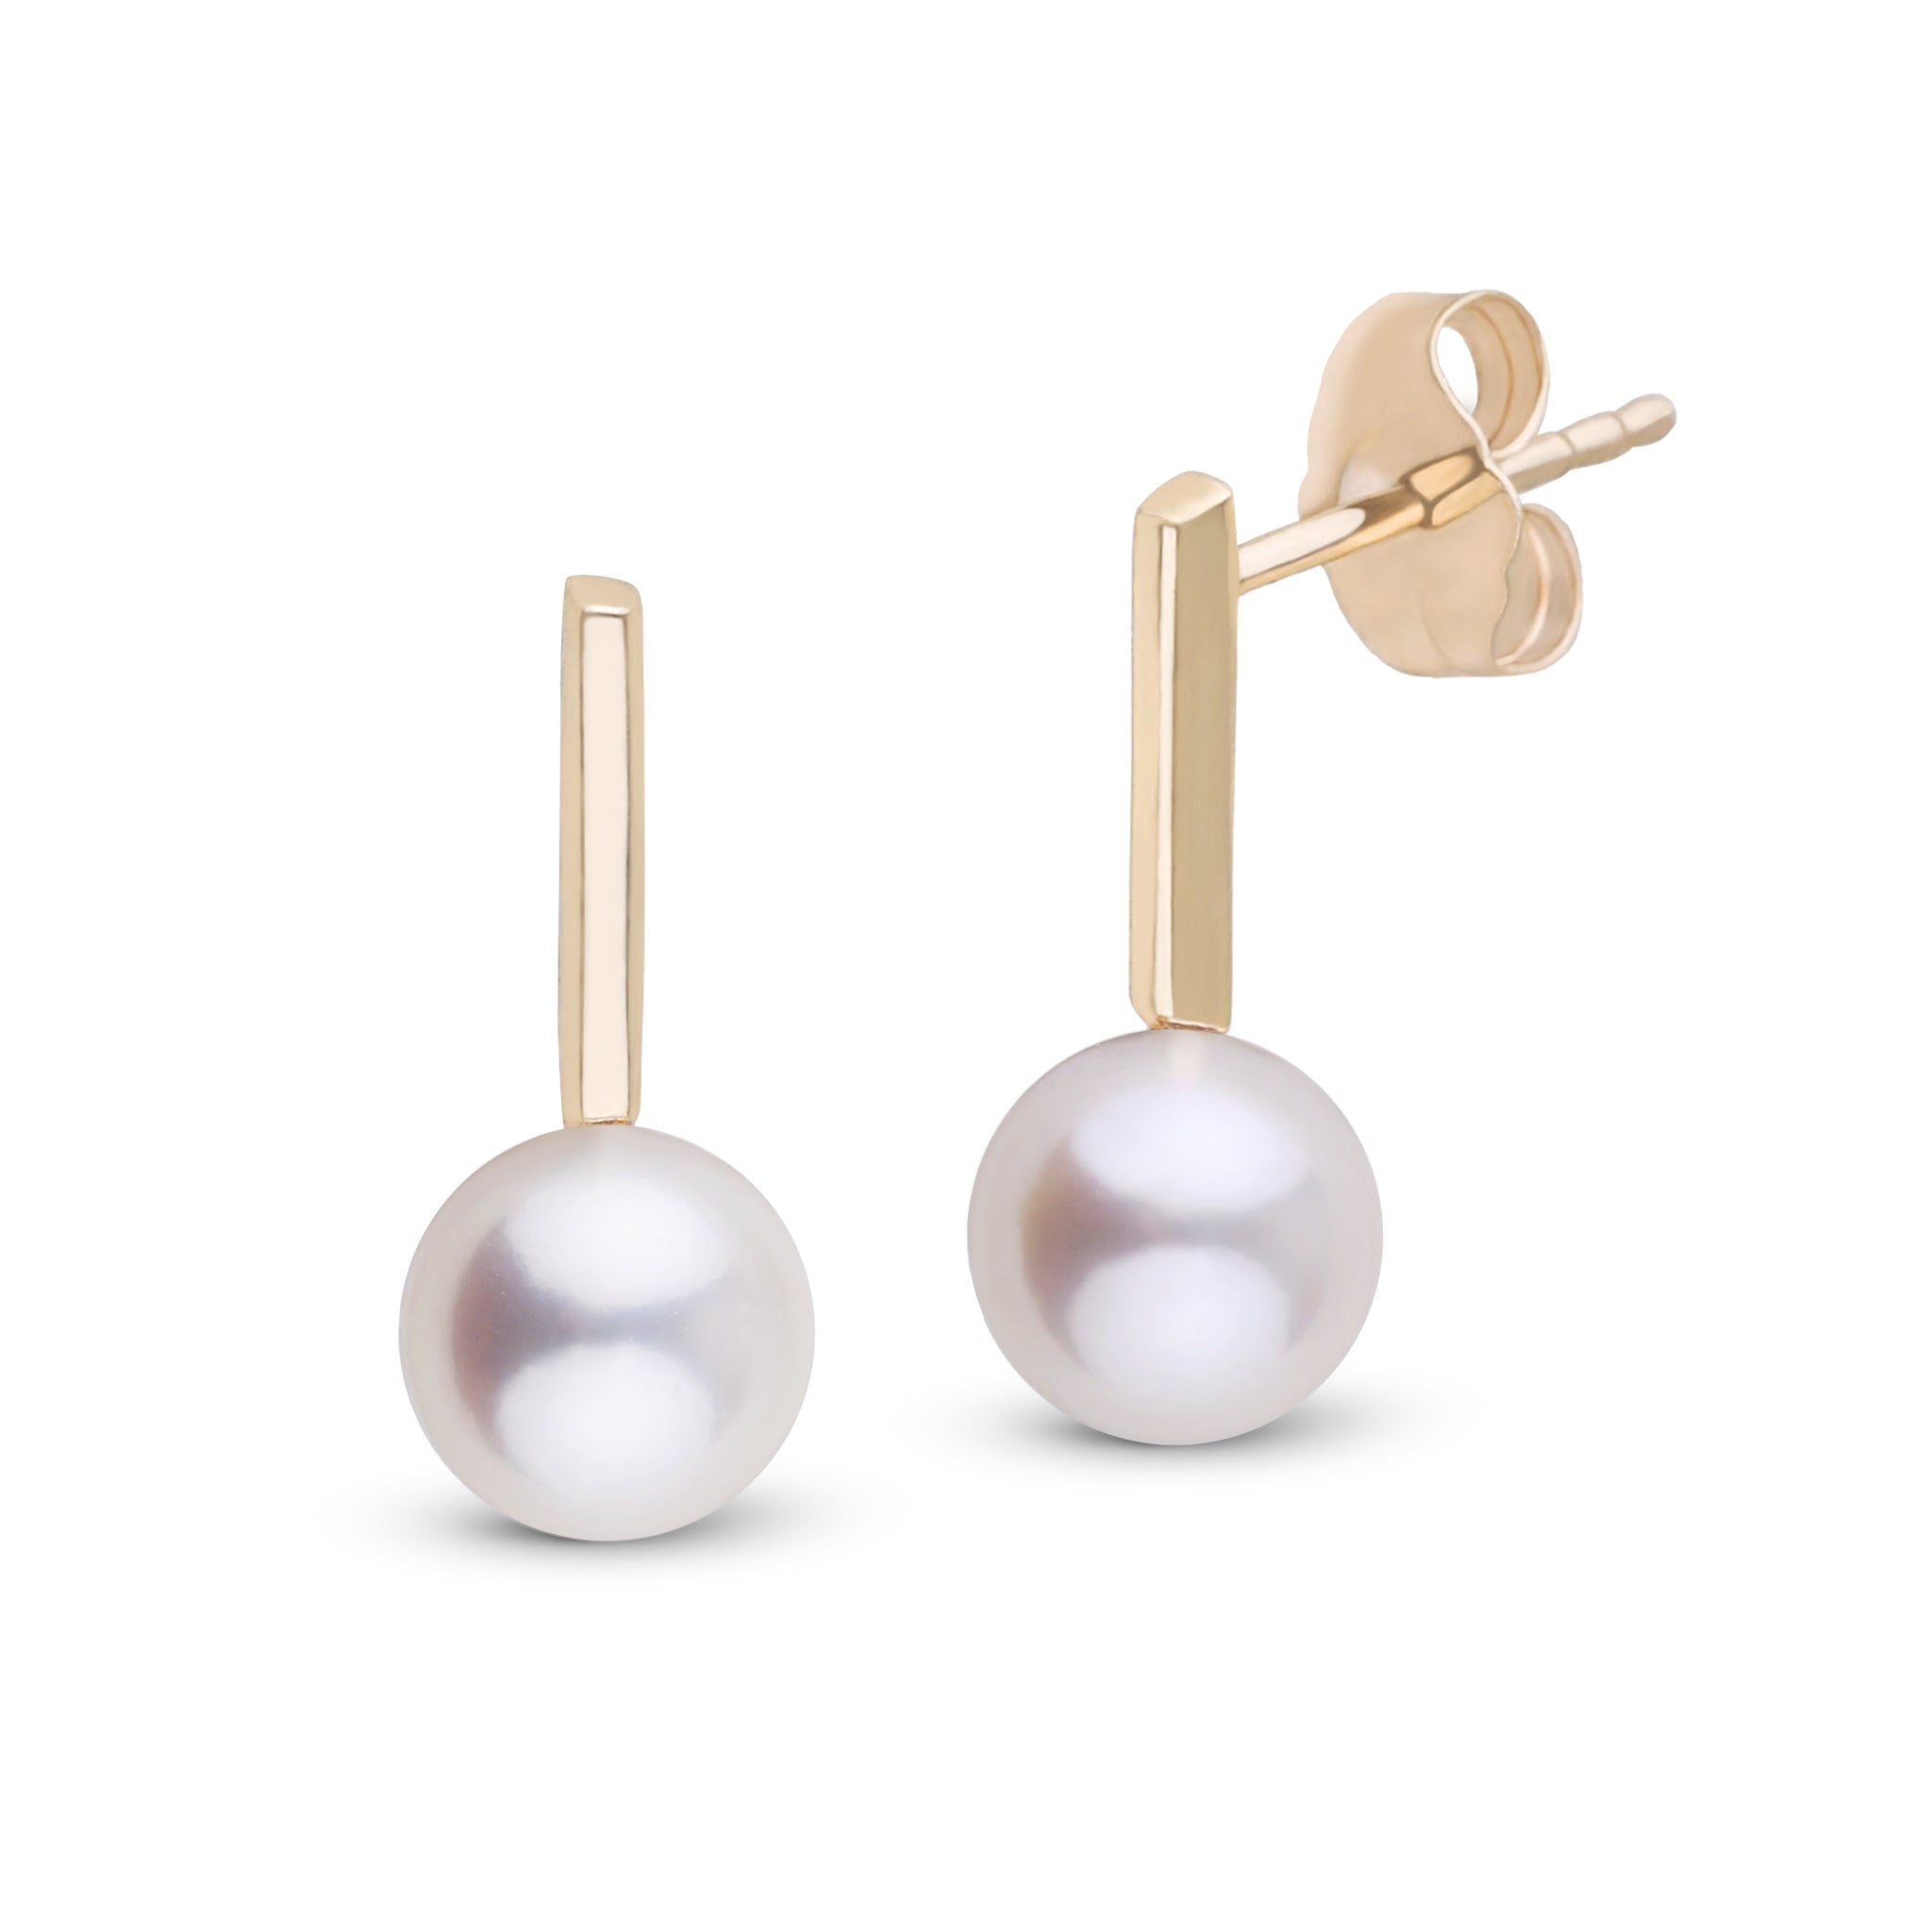 Petite Bar Collection 6.5-7.0 mm Freshadama Pearl Earrings Yellow Gold